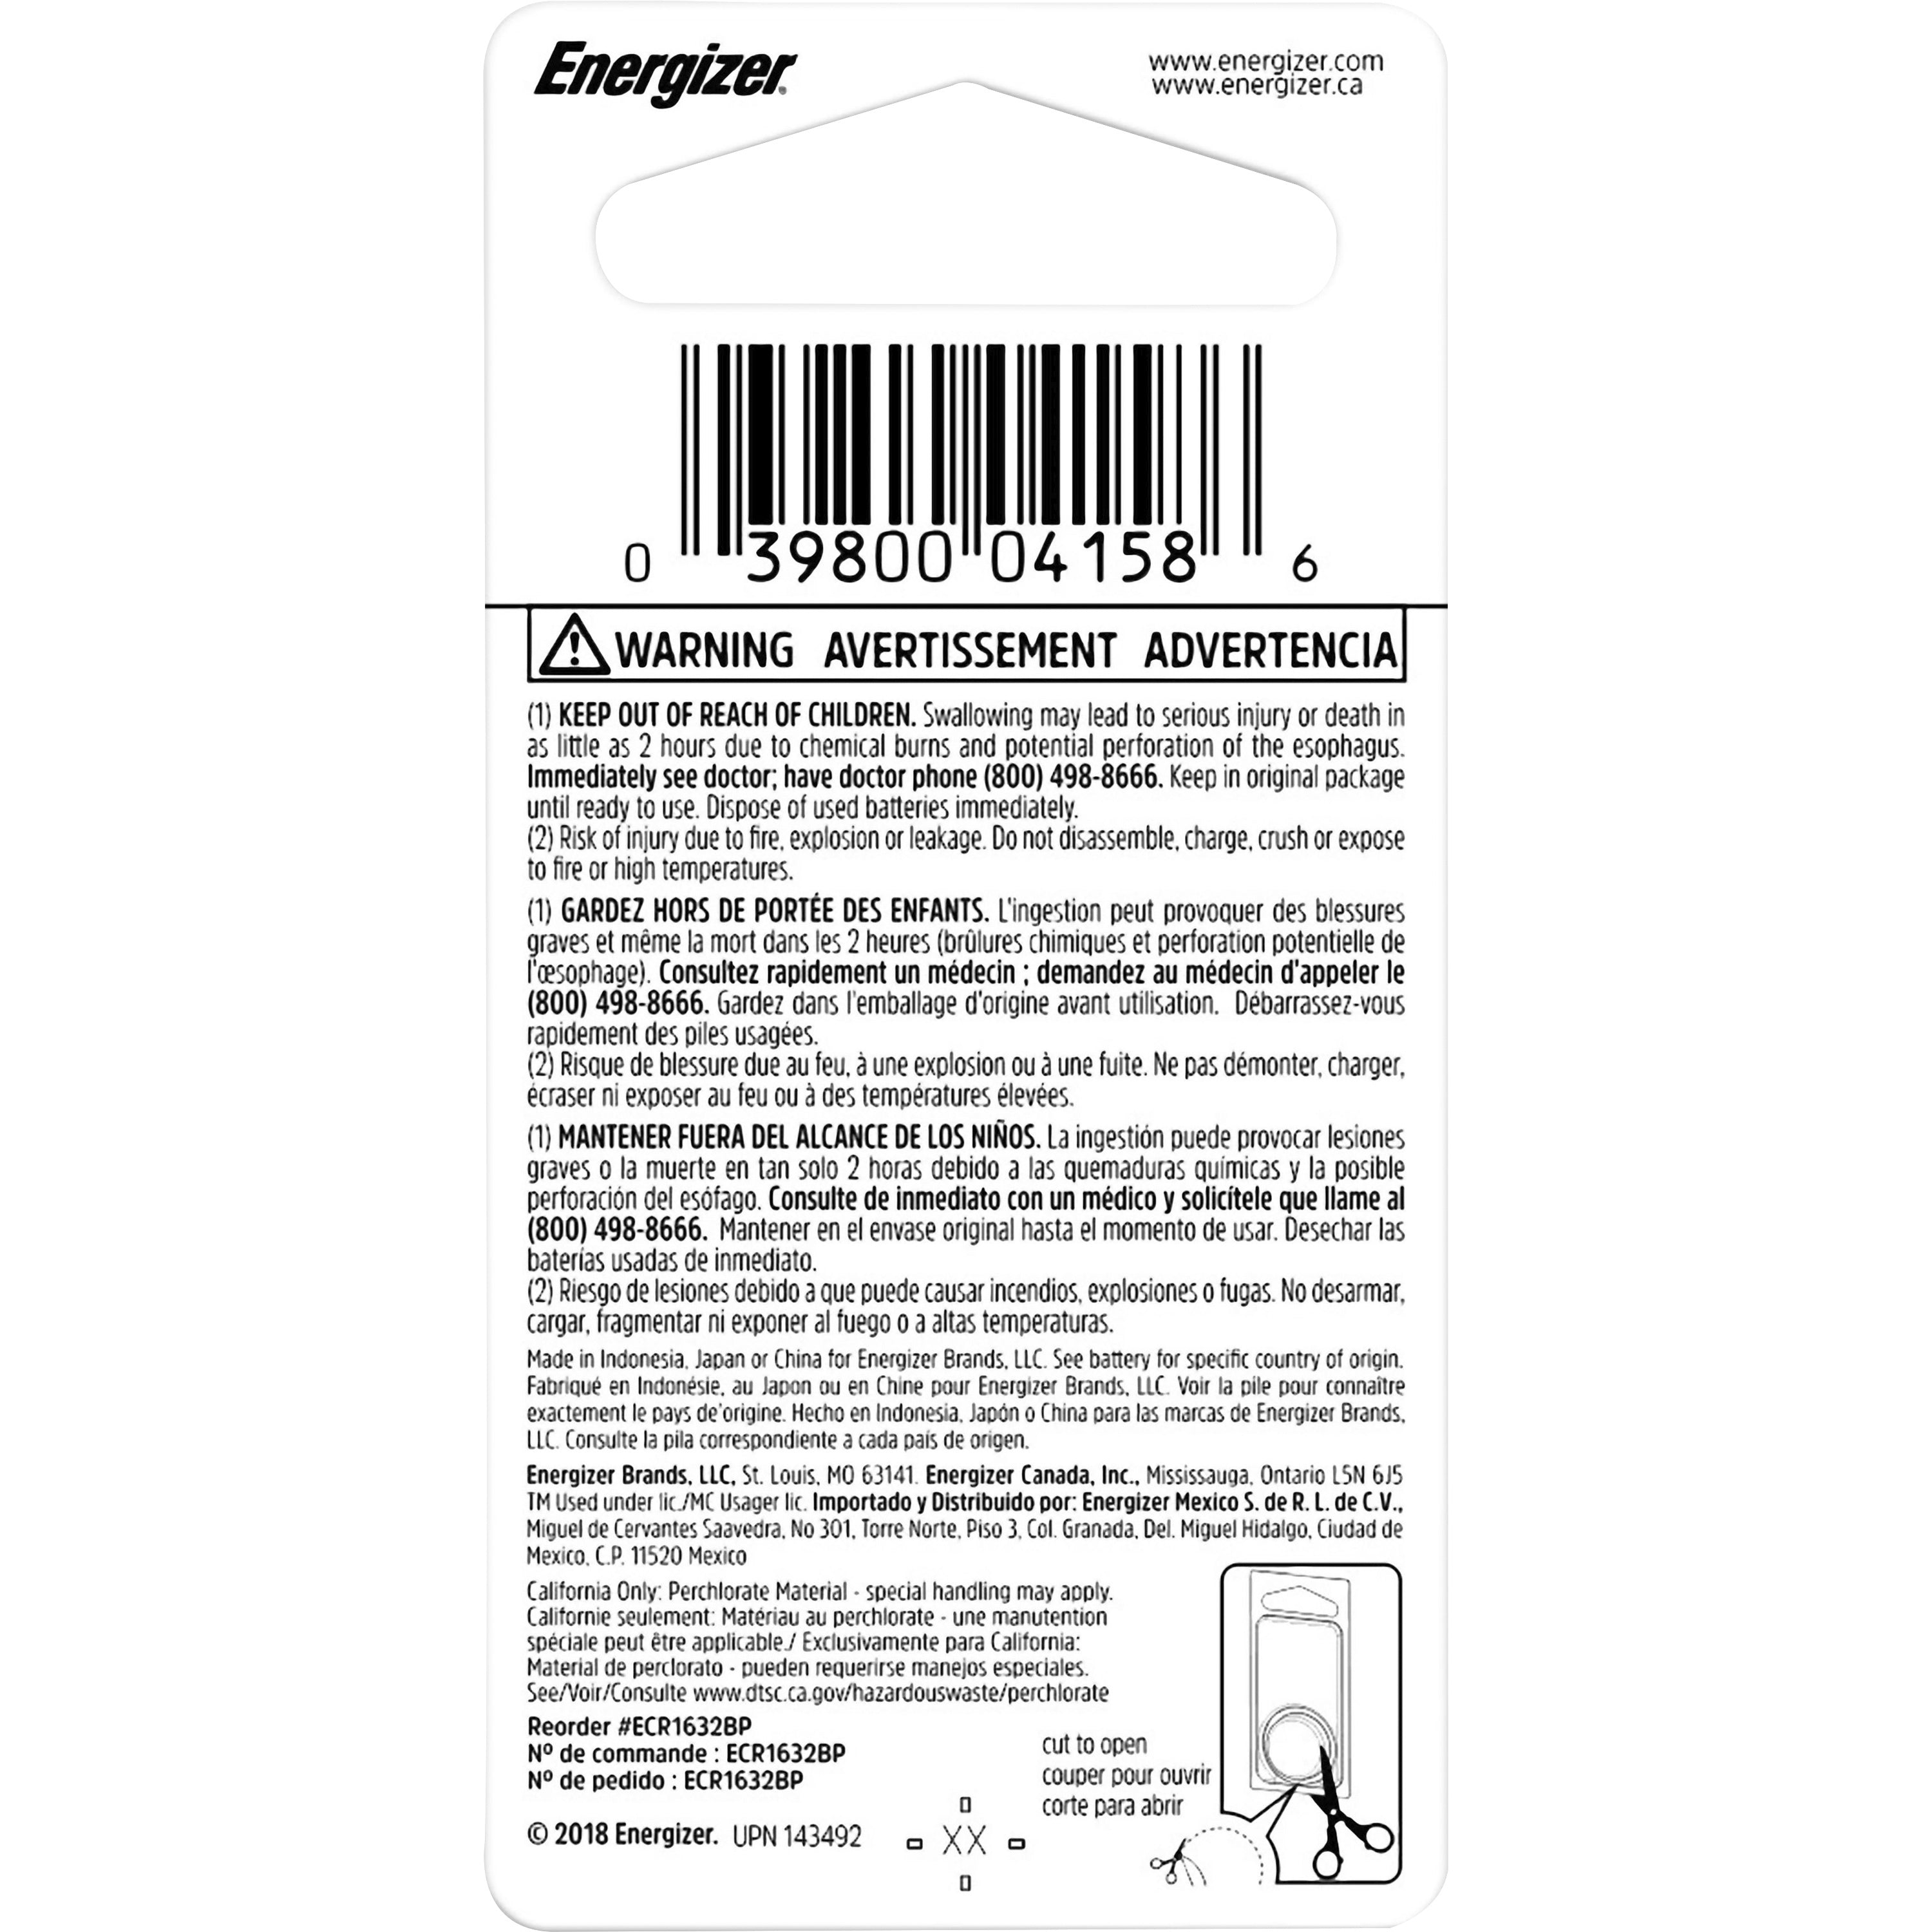 energizer-1632-lithium-coin-battery-1-pack-for-toy-heart-rate-monitor-glucose-monitor-keyless-entry-game-keyfob-transmitter-watch-remote-control-cr1632-3-v-dc-130-mah-lithium-manganese-dioxide-li-mno2-1-pack_eveecr1632bp - 2